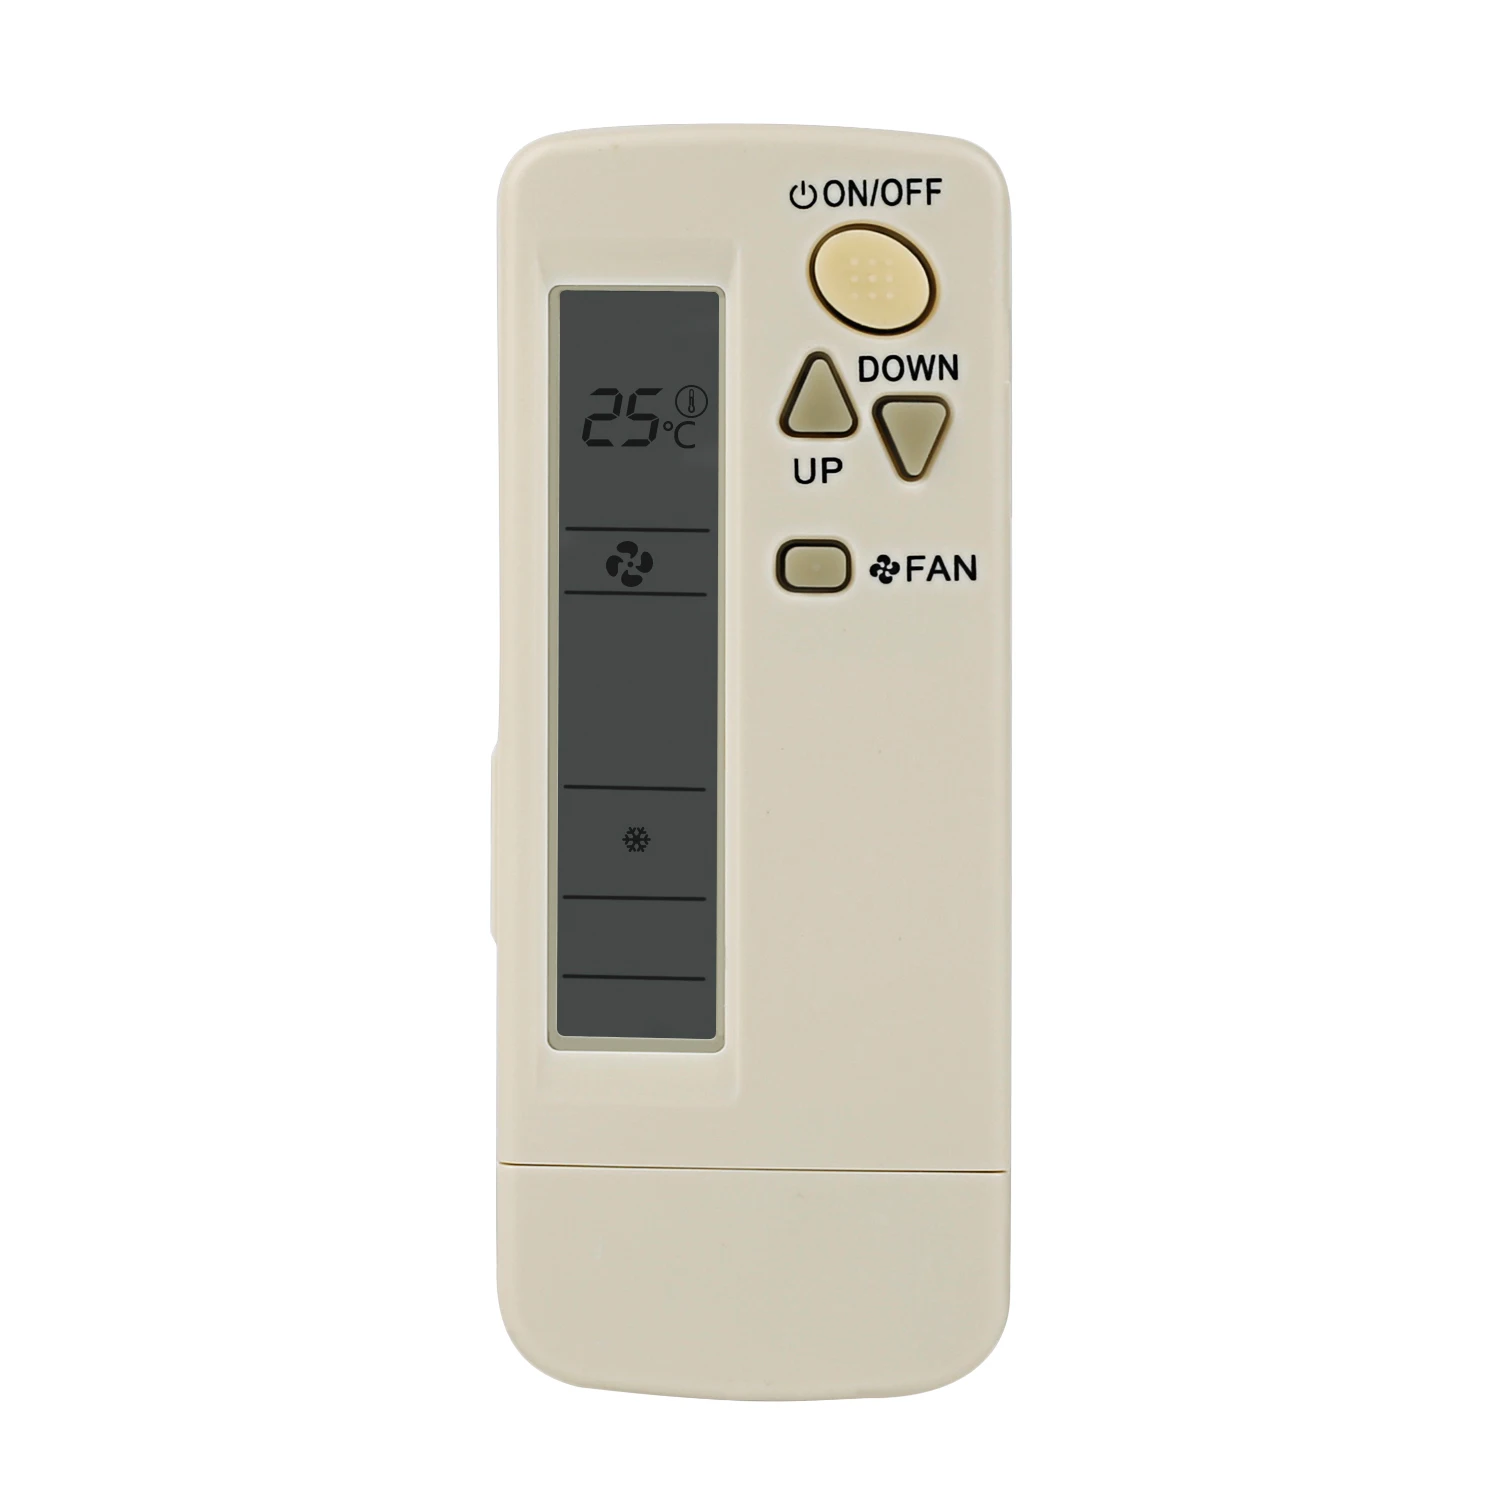 Details about   1PC Daikin BRC4H611 Mini Remote Controller for Central Air Conditioning 